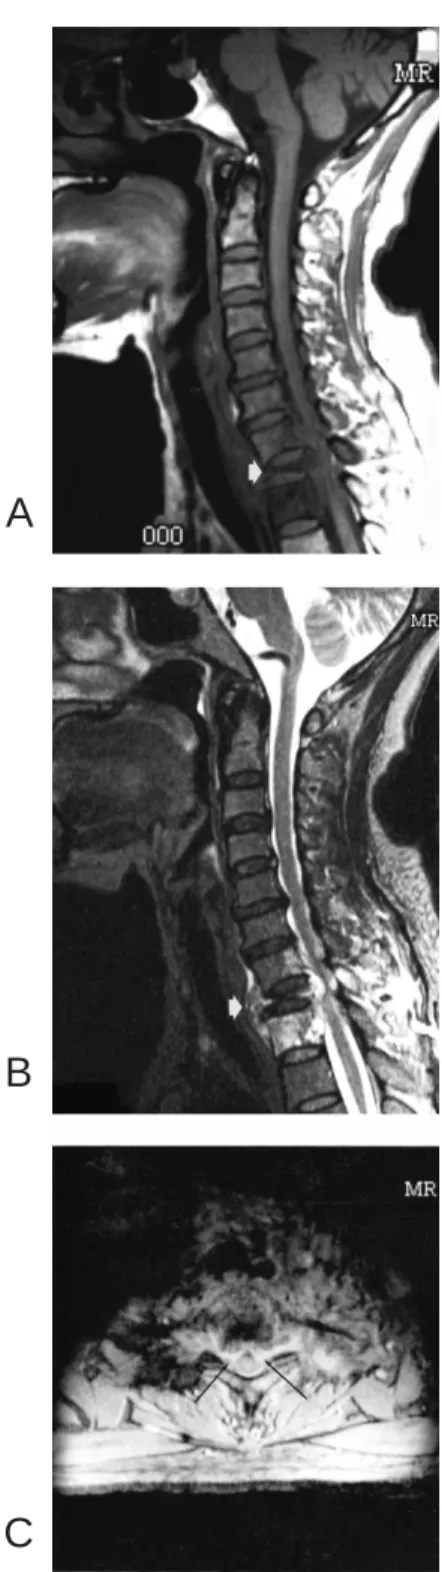 Fig. 1. A: Sagittal T1-weighted MR image of cervical spine shows pathologic compression fracture at T1 vertebral body (arrow) and replacement of fatty marrow by low signal intensity tumor at the C7, T1 and T2 vertebral bodies